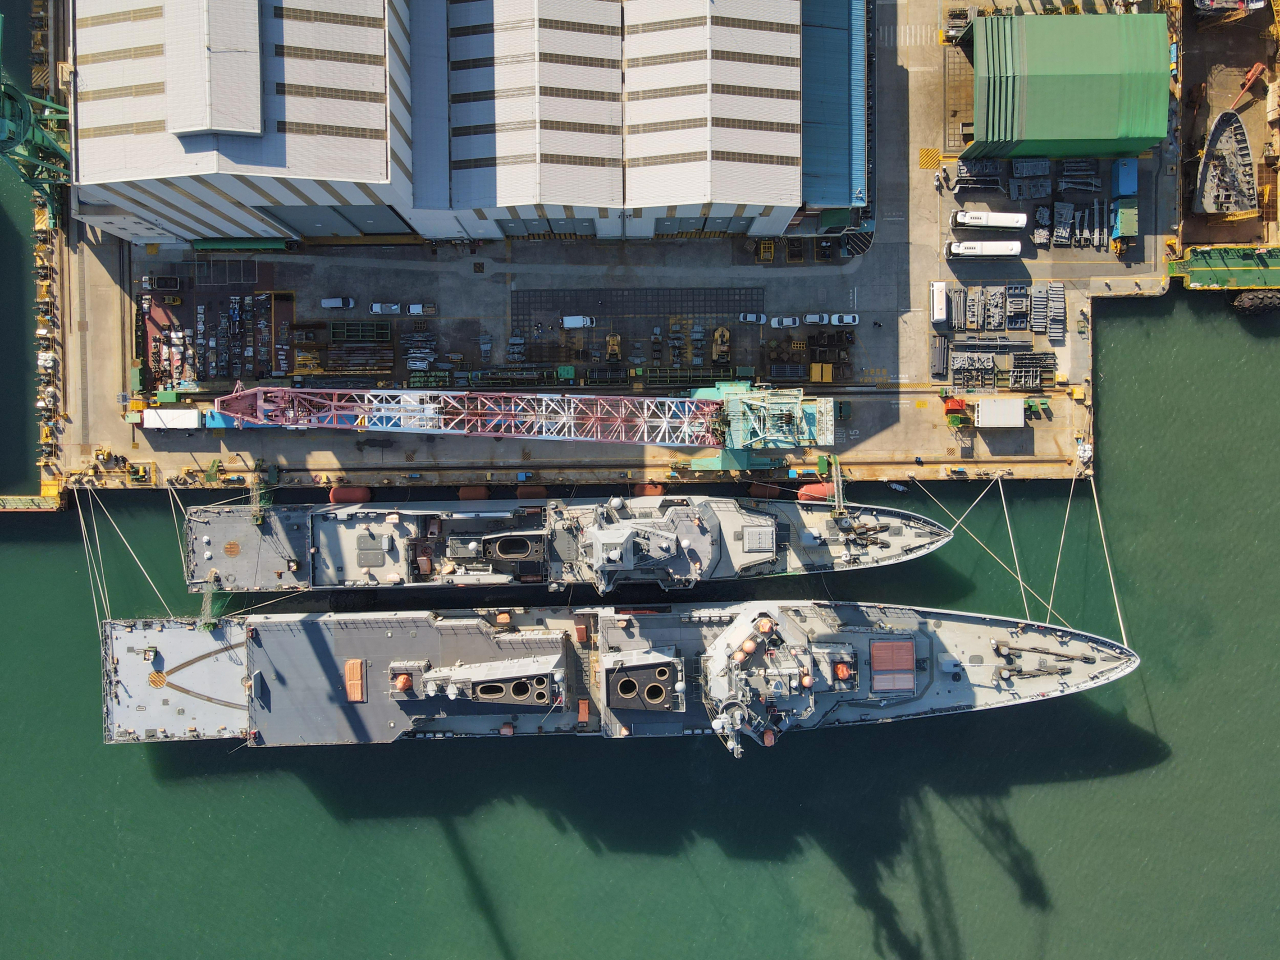 South Korean Navy's Jeongjo the Great (Bottom), an Aegis-equipped destroyer, and Chungnam frigate are tied to a pier at HD Hyundai Heavy Industries' Ulsan shipyard on Monday. (HD Hyundai)